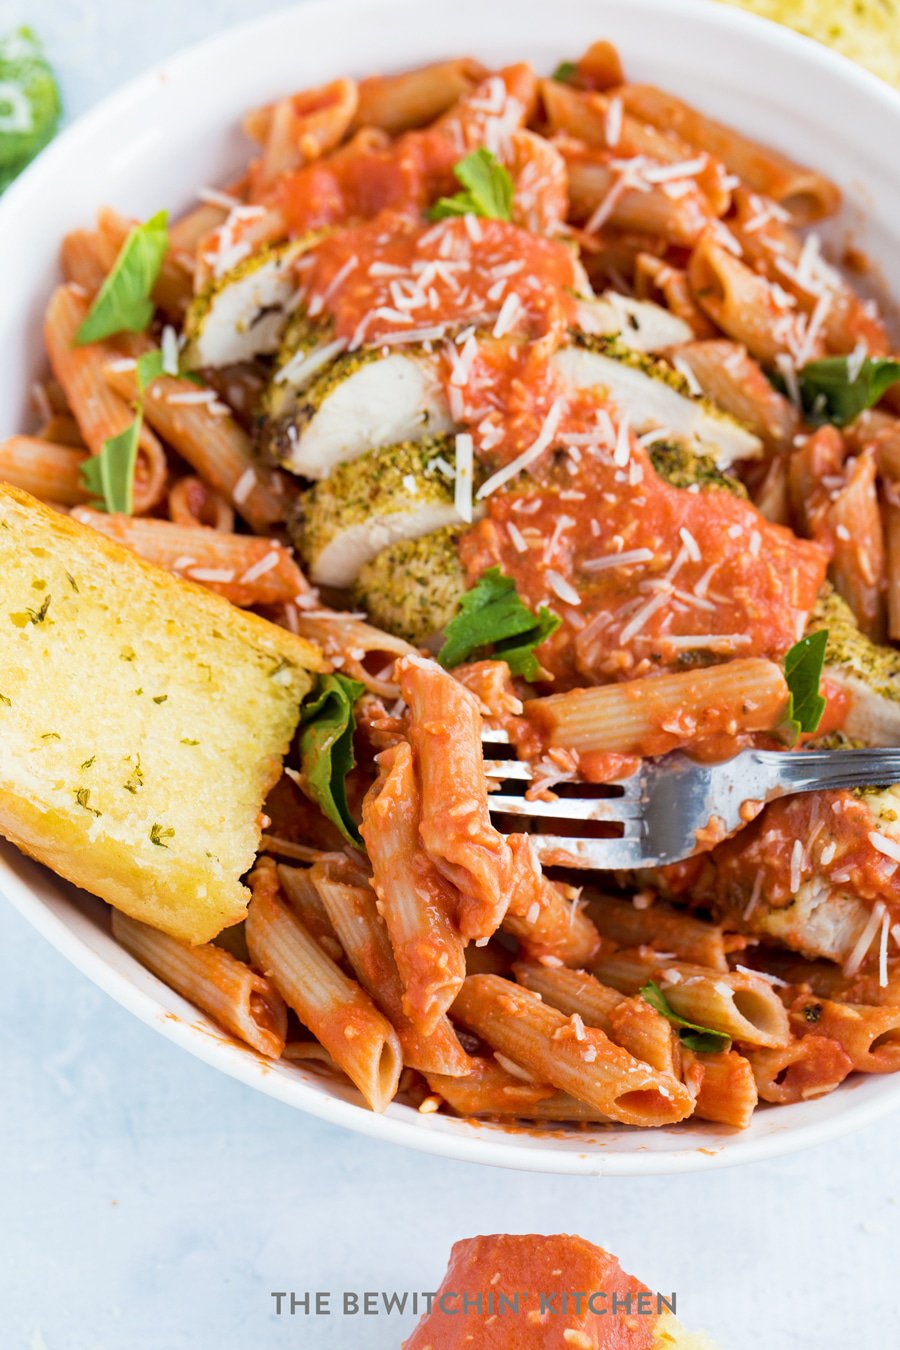 Parmesan Tomato Vodka Sauce with Penne | The Bewitchin' Kitchen